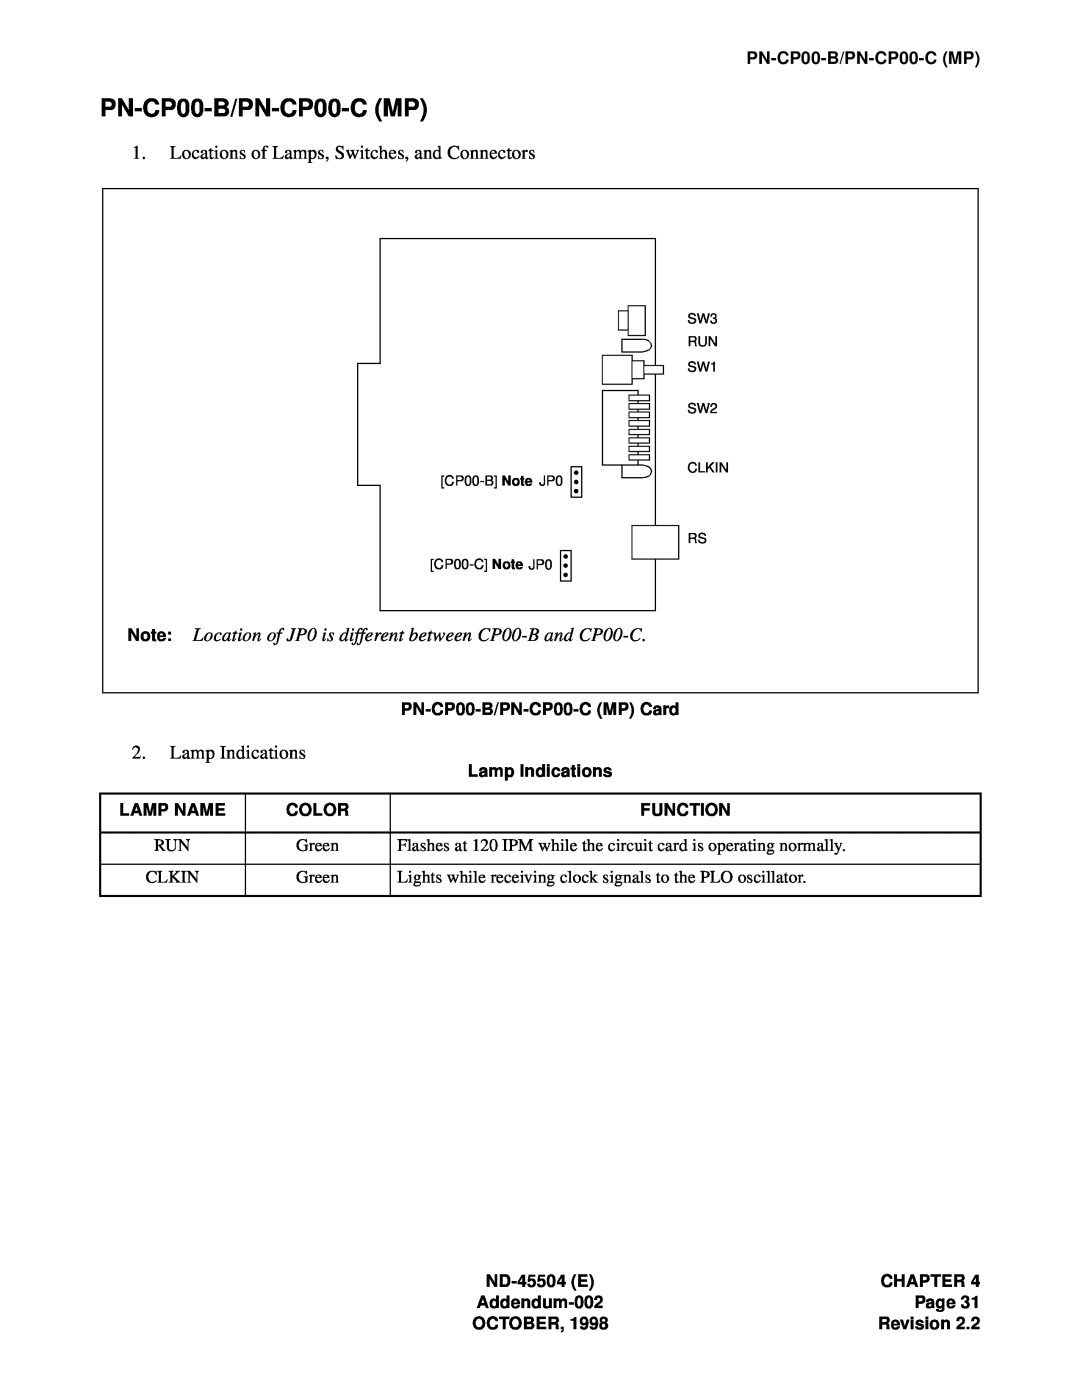 NEC 2000 IVS manual PN-CP00-B/PN-CP00-CMP, Locations of Lamps, Switches, and Connectors, Lamp Indications 